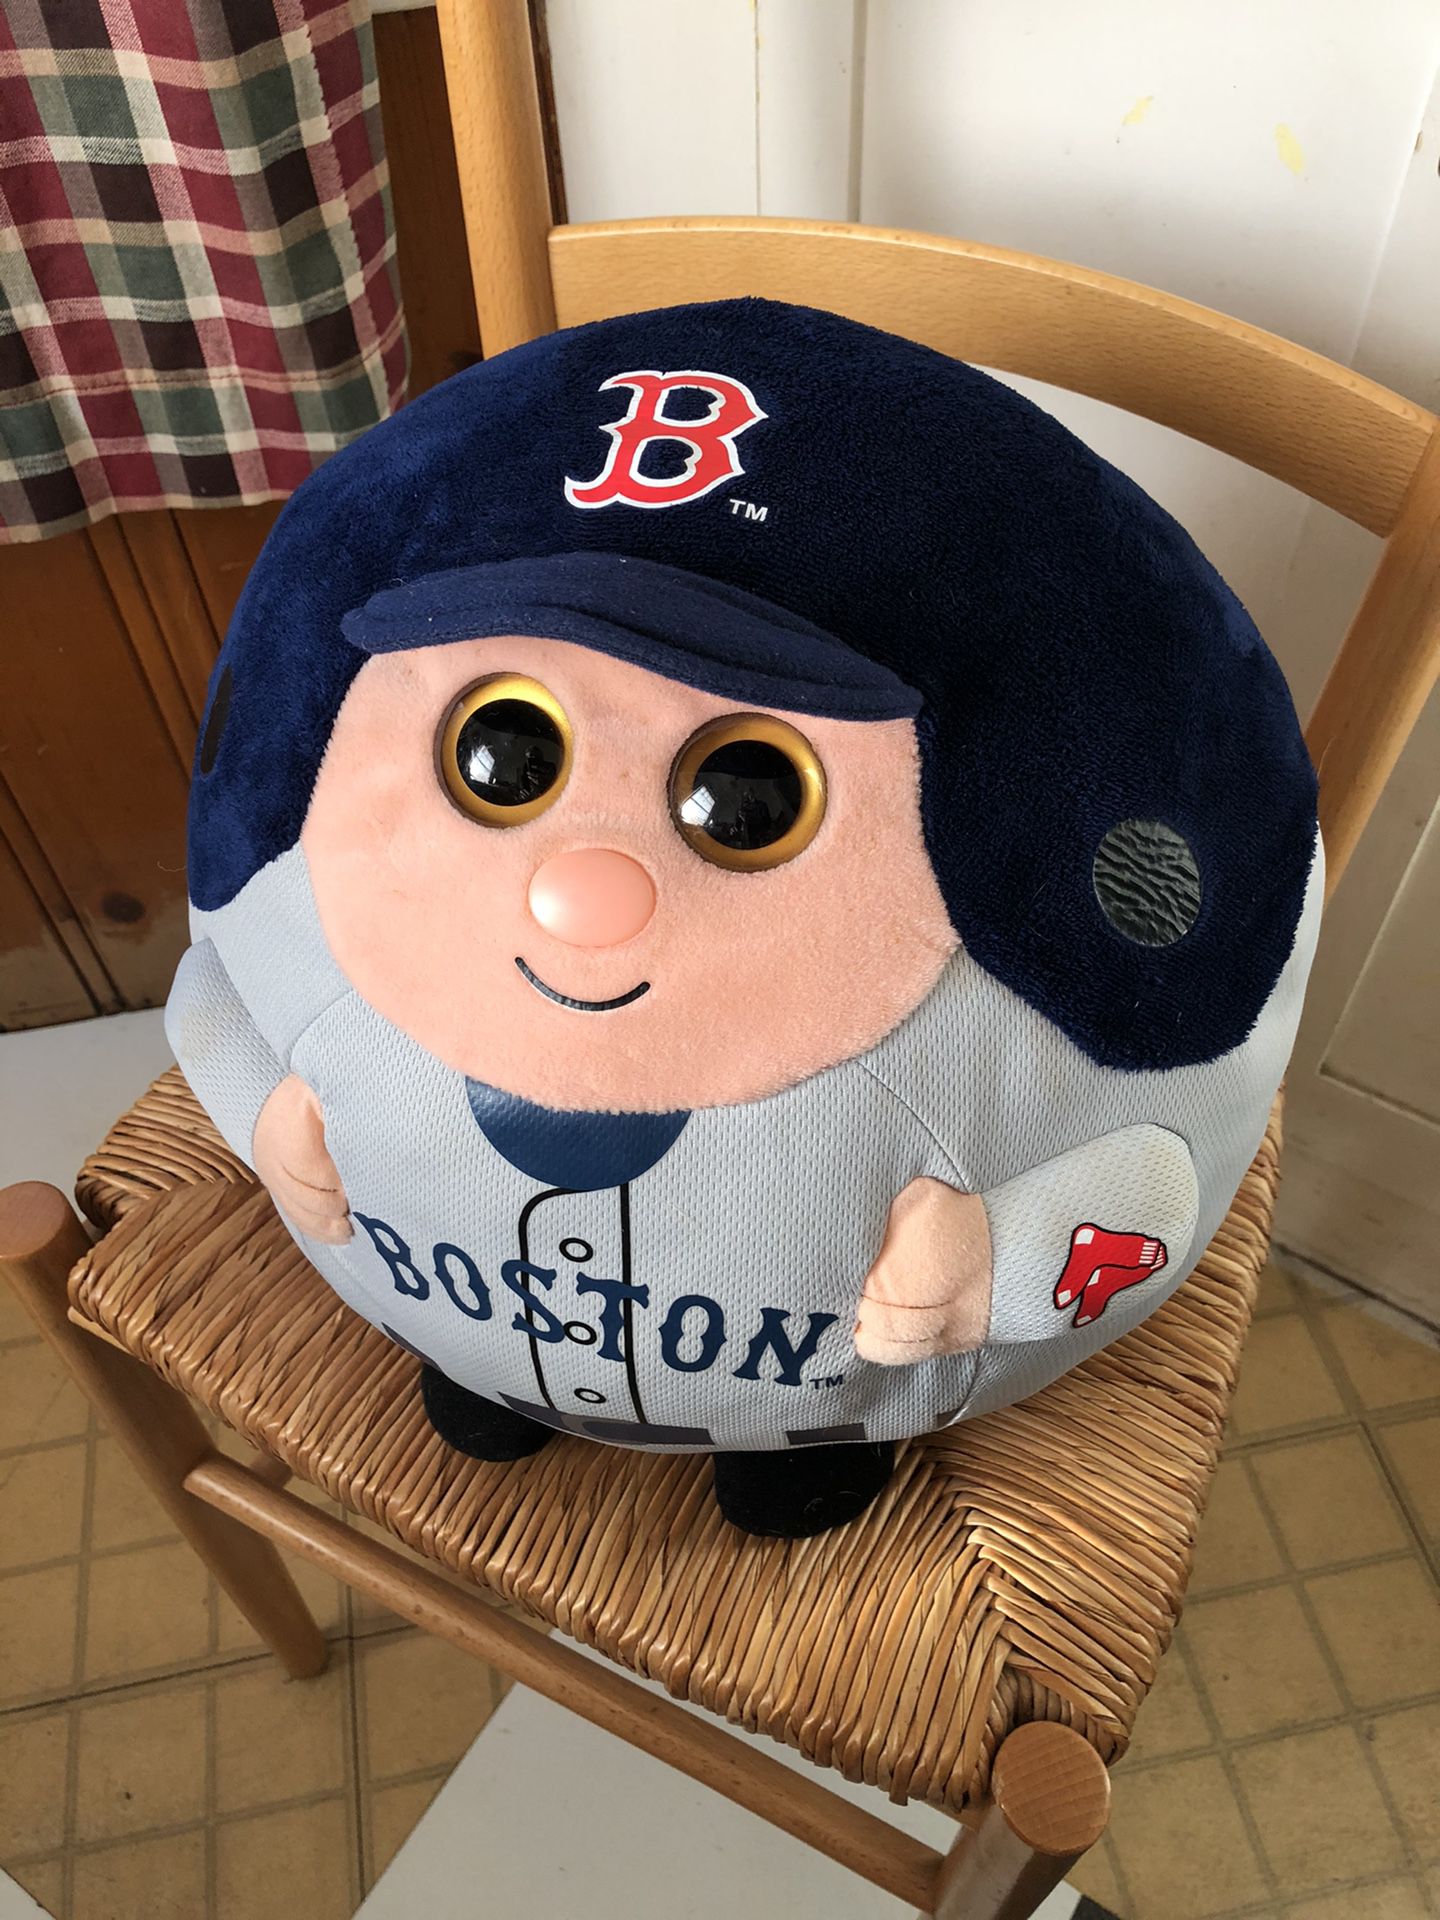 Red Sox Beanie Ballz by TY. (Large 13”) Plush pillow, stuffed animal.